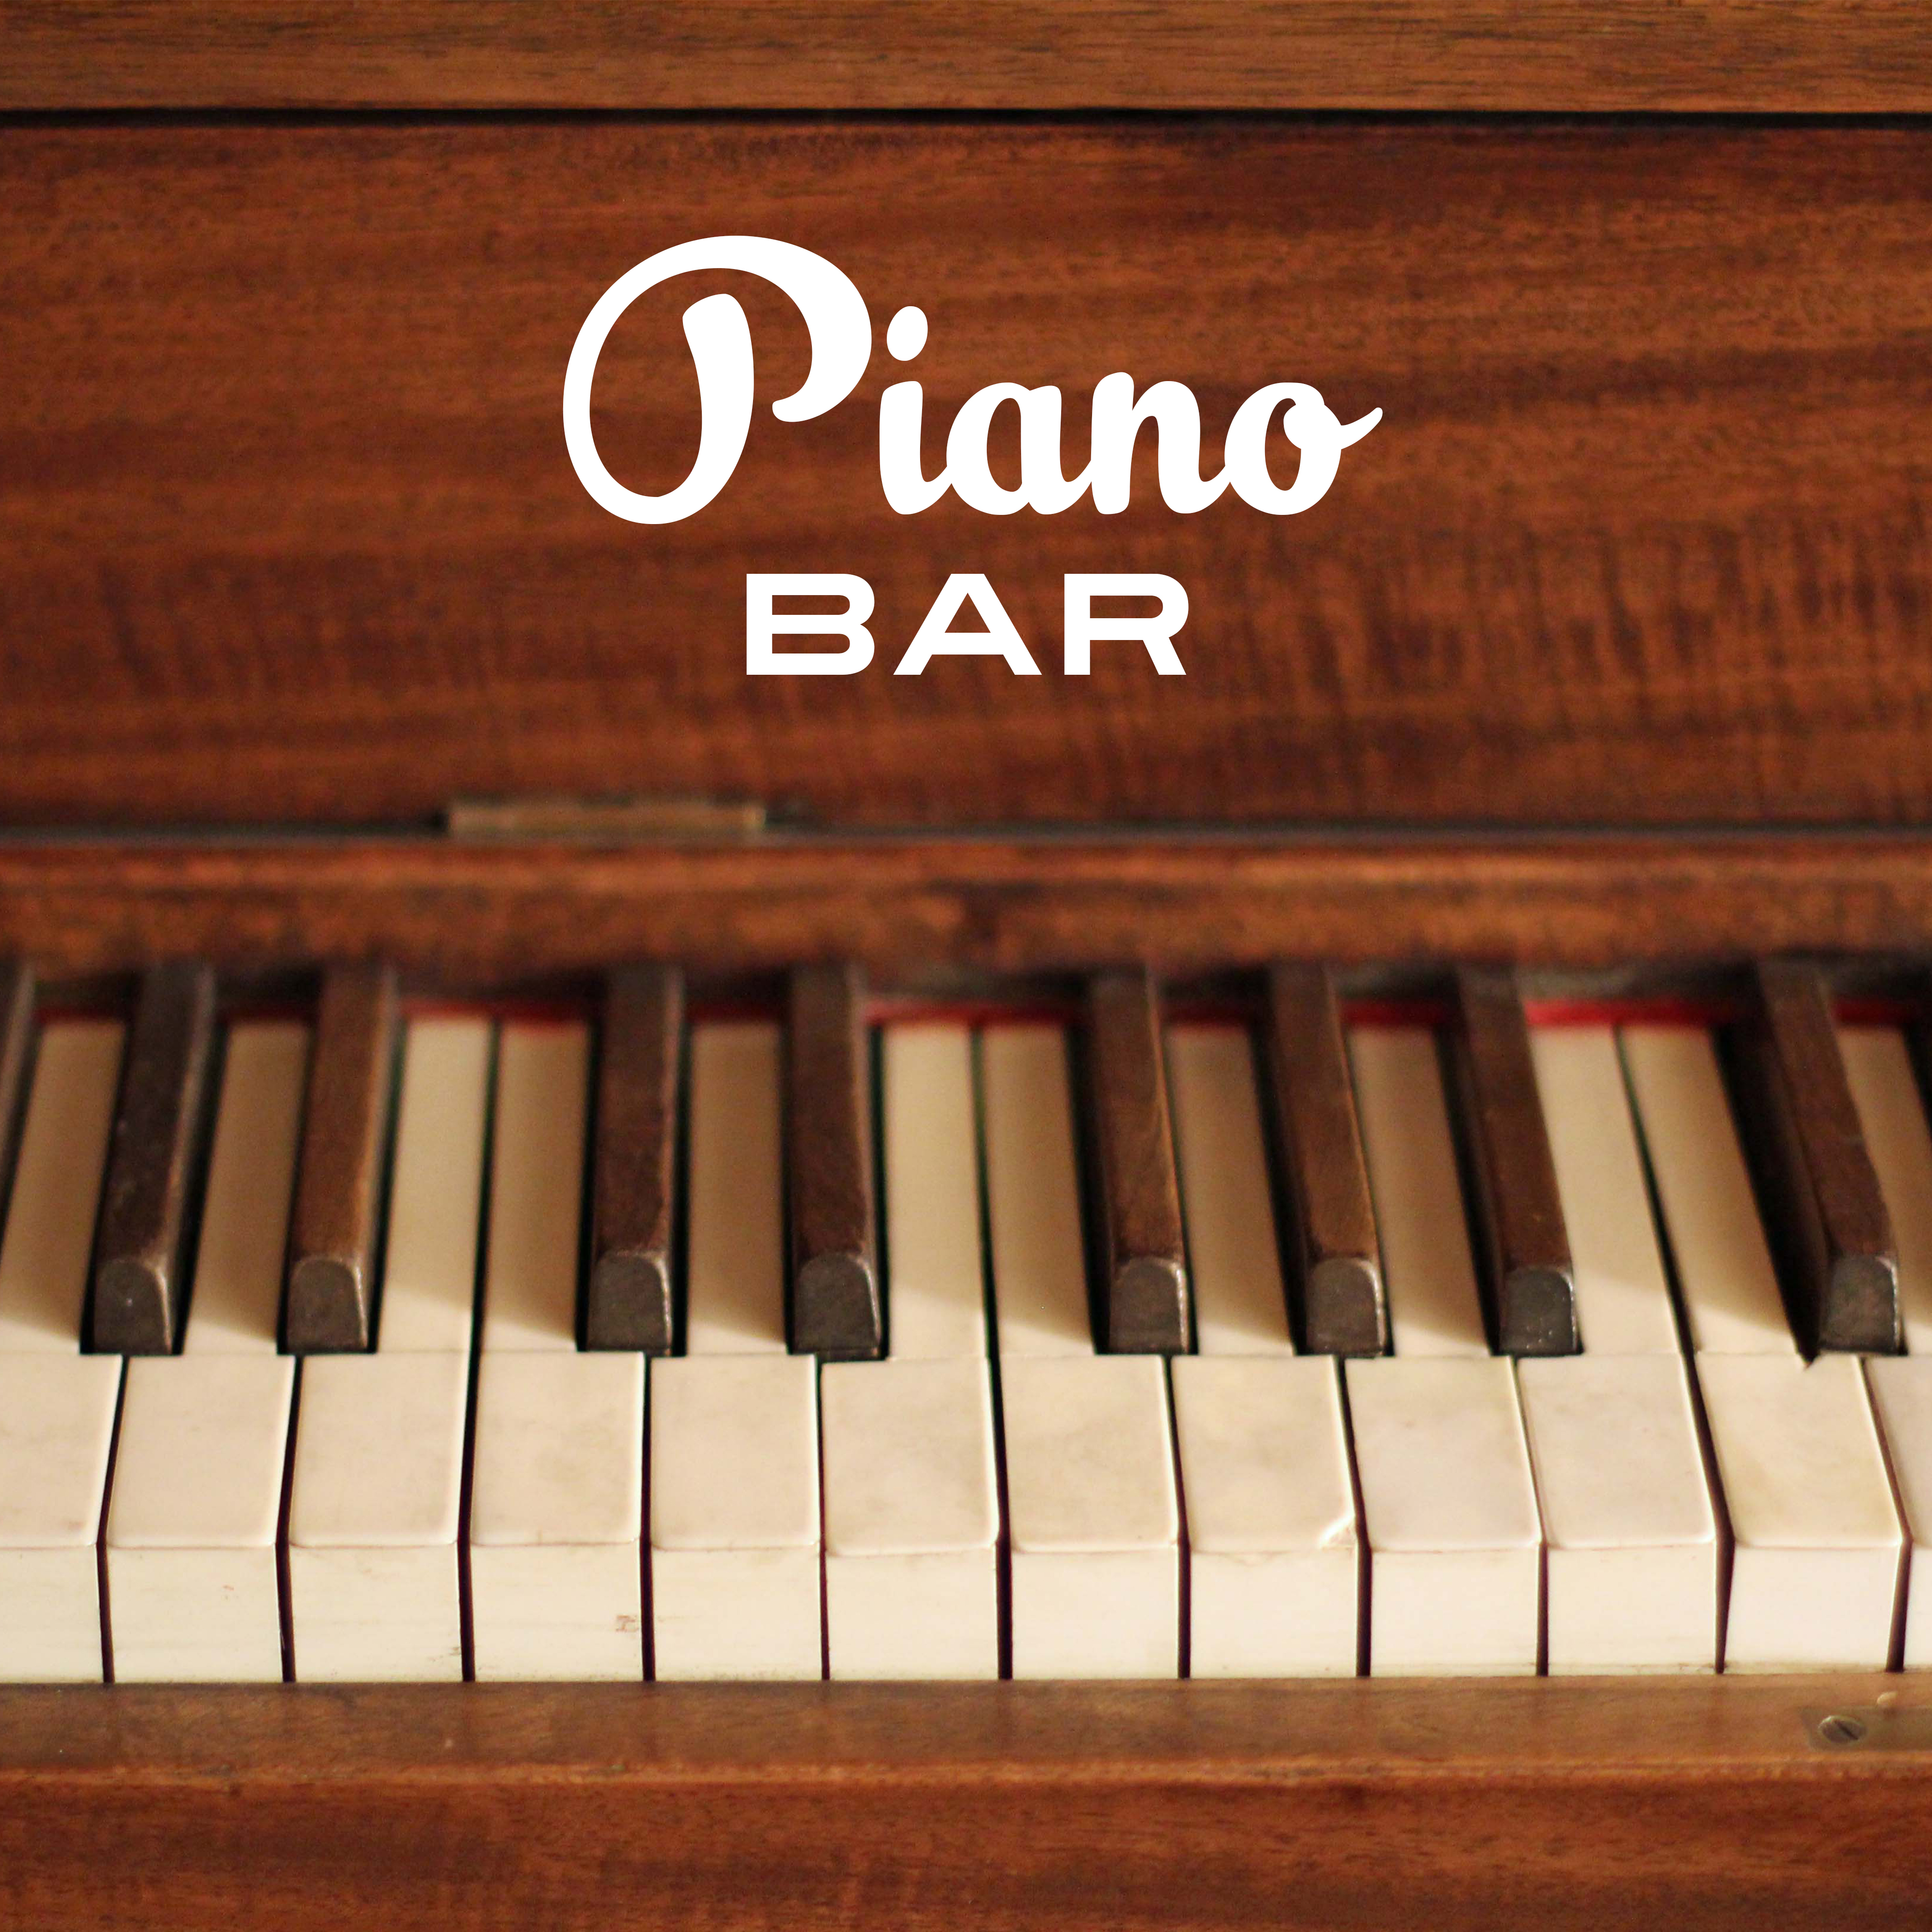 Piano Bar  Restaurant Jazz, Cafe Music, Smooth Jazz for Relaxation, Stress Relief, Ambient Music, Calm Down